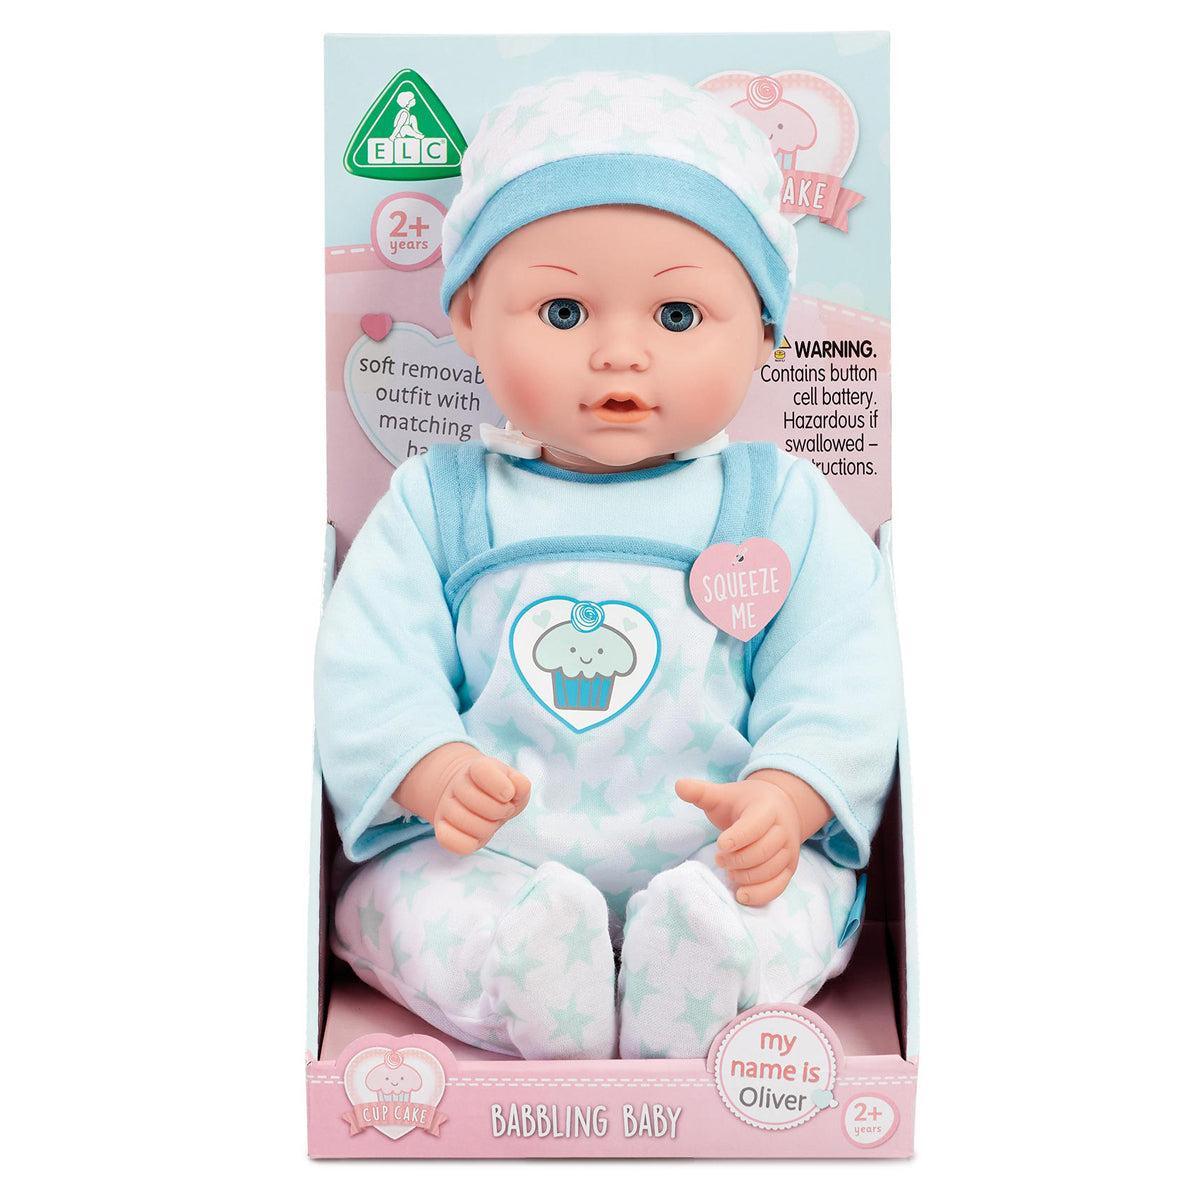 Cupcake Babbling Baby Oliver Doll